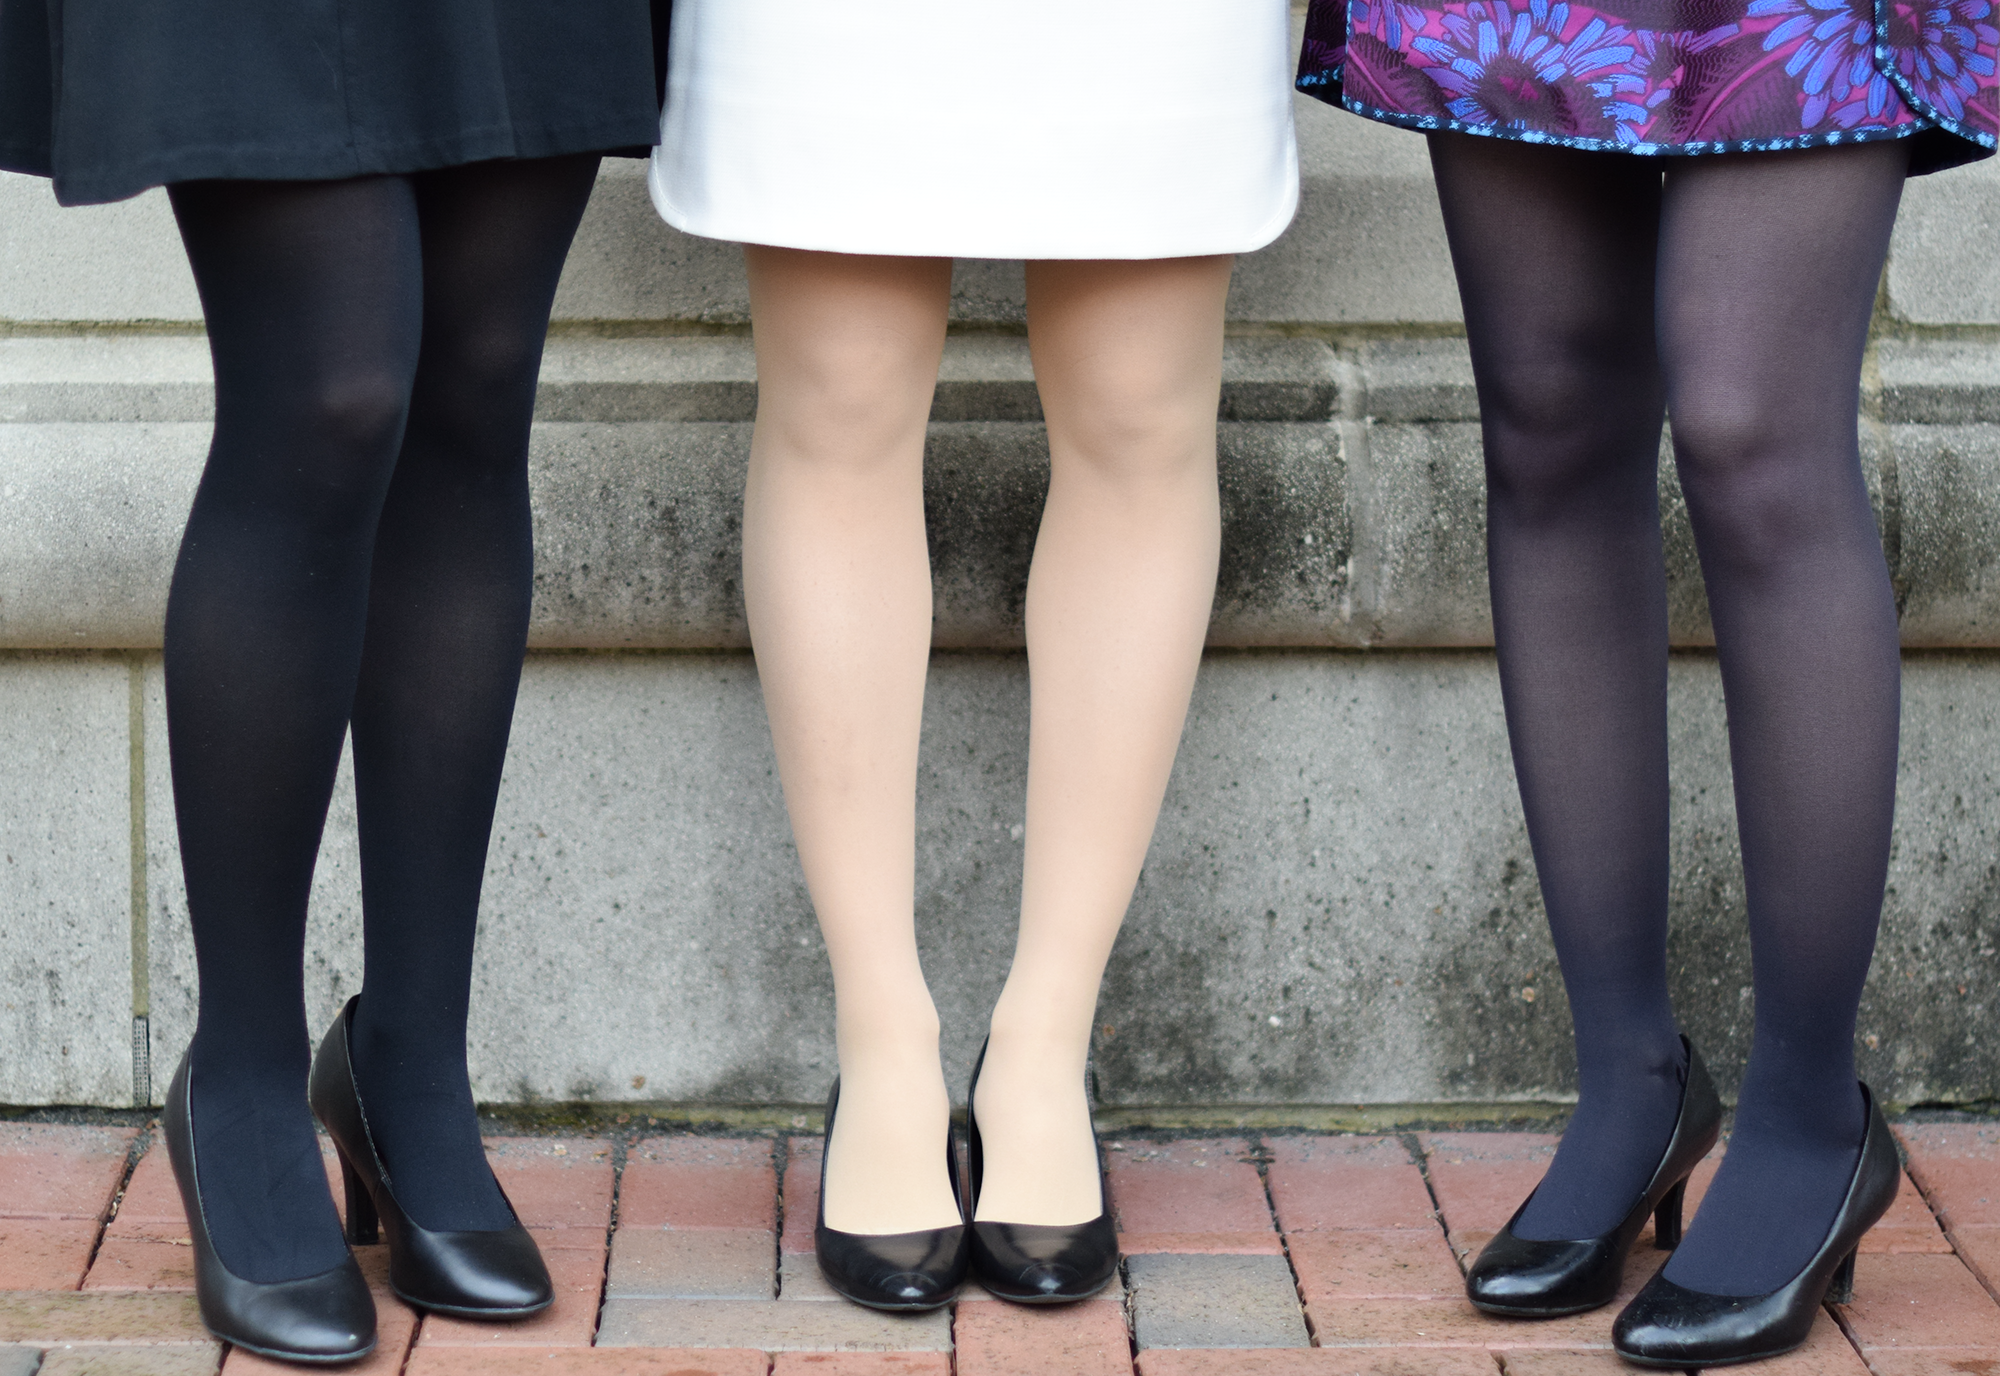 9 Pantyhose for Varicose Veins, Compression Stockings to Hide